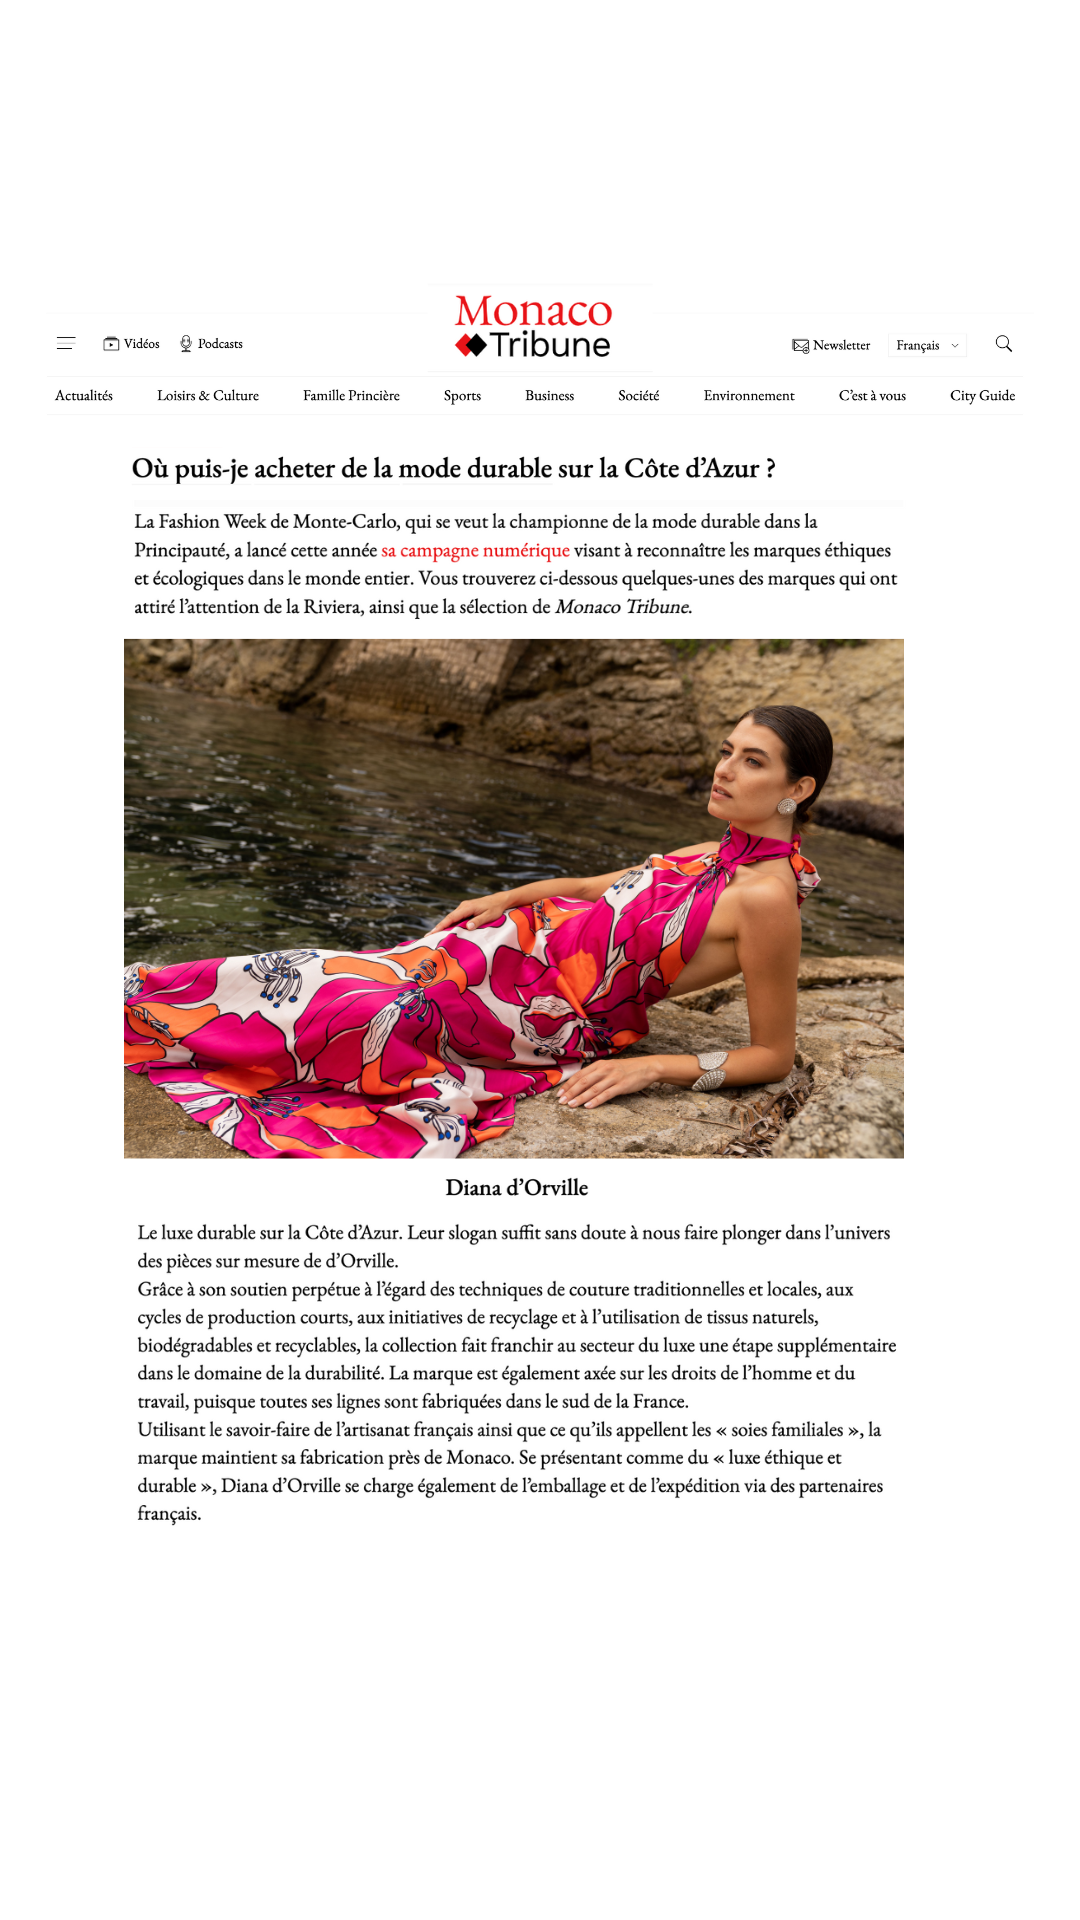 Shop Luxury Fashion brands on the French Riviera Diana d'Orville Couture